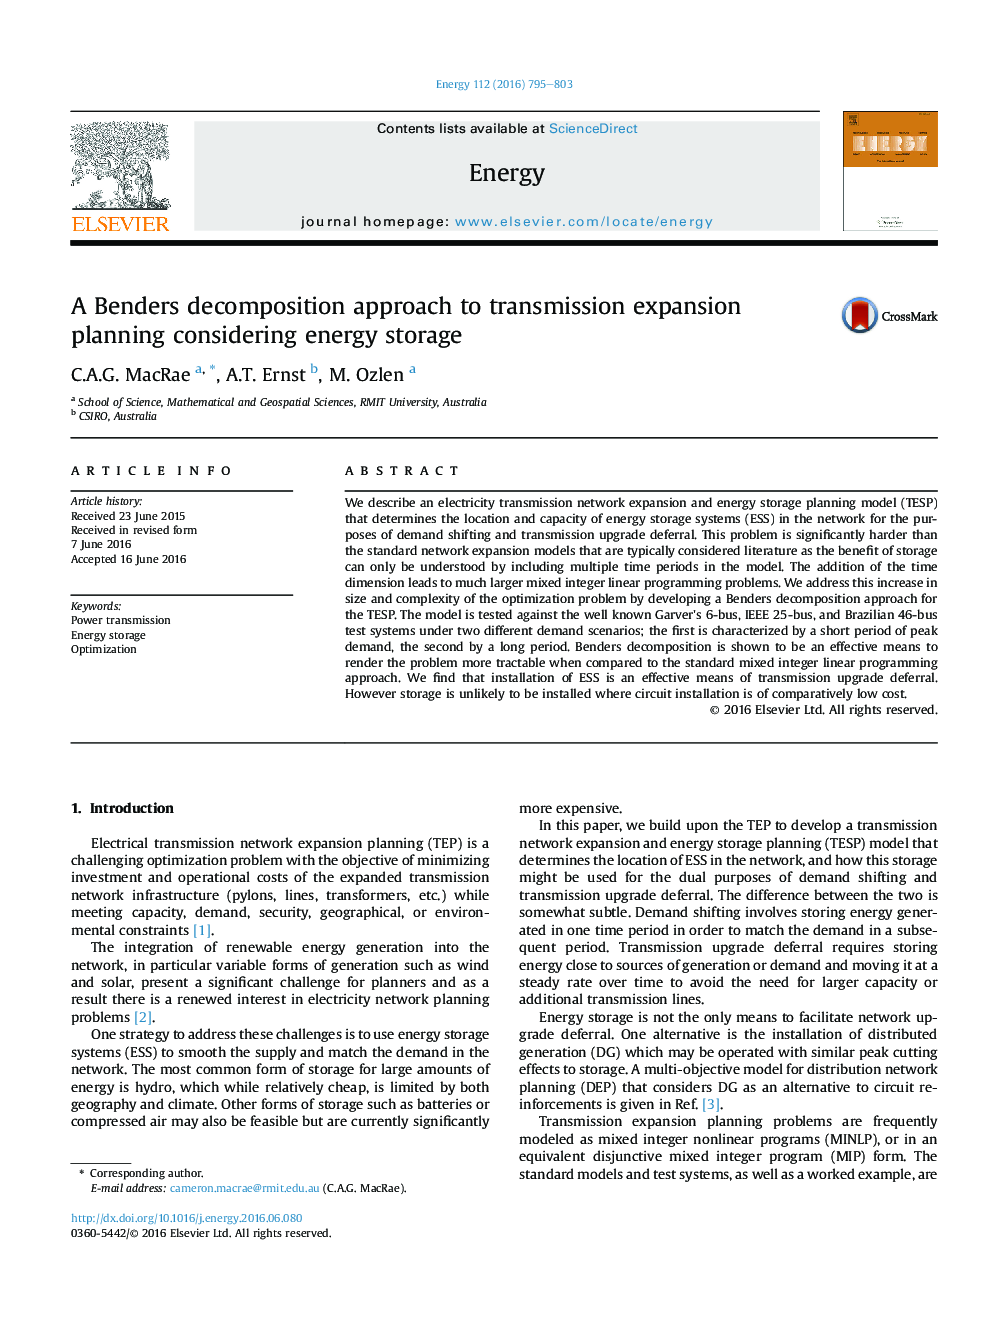 A Benders decomposition approach to transmission expansion planning considering energy storage